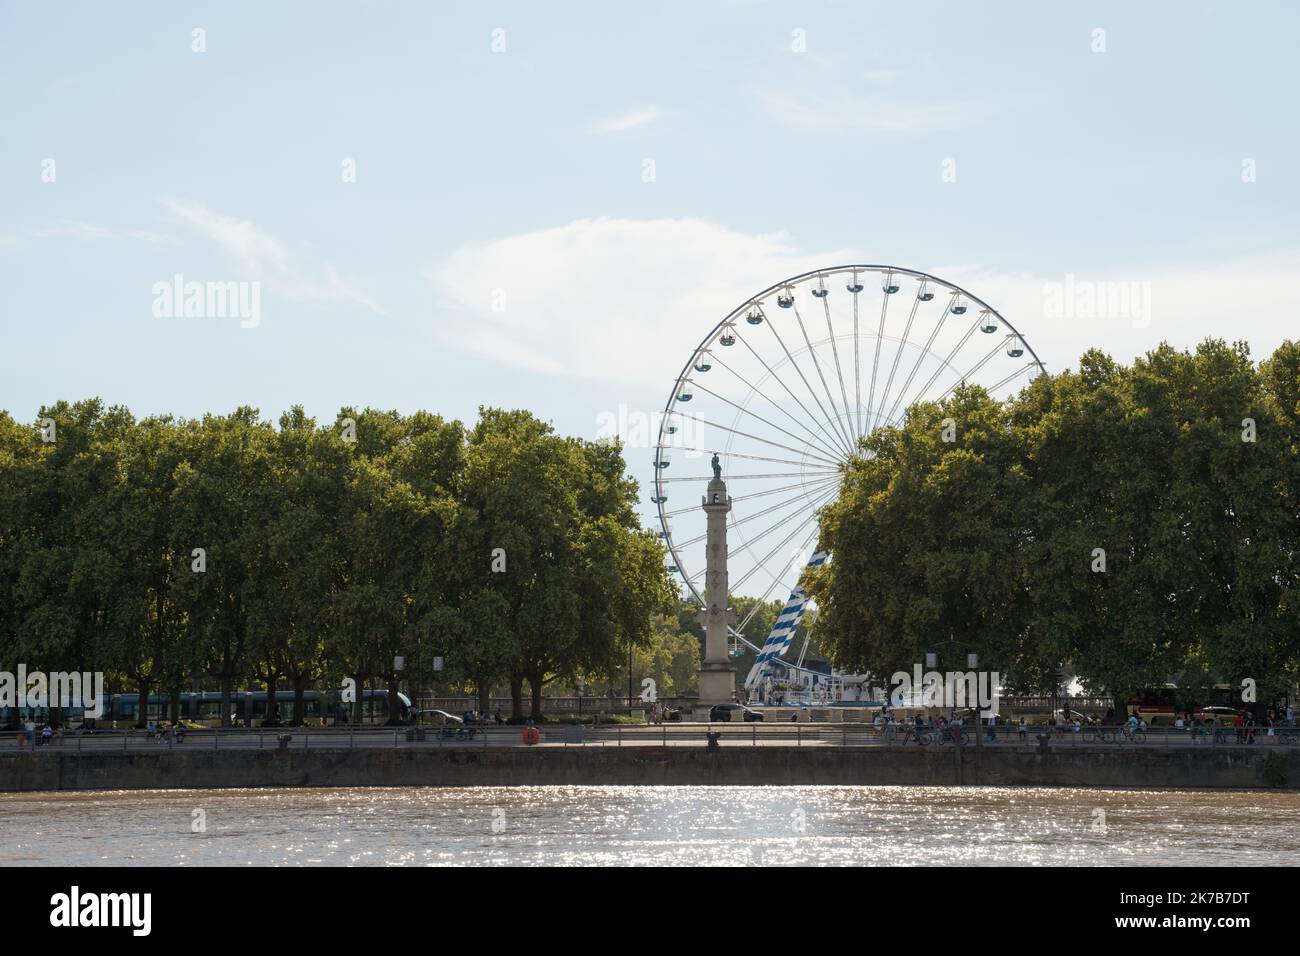 Bordeaux, France; 08092022: Fair ferris wheel at Bordeaux park. Water front seen from a boat. Stock Photo